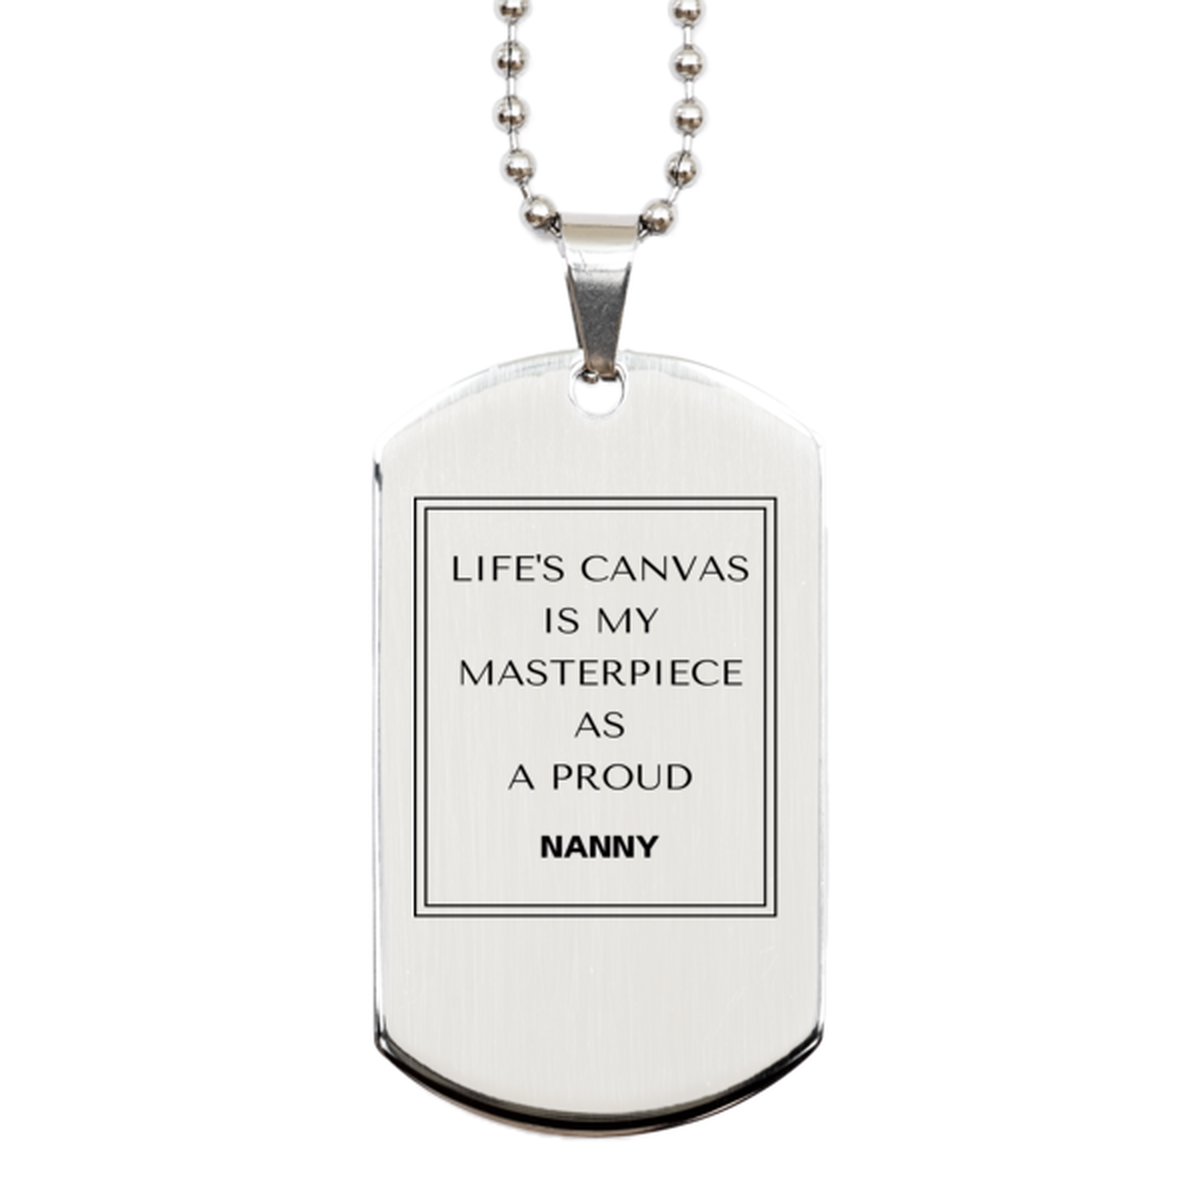 Proud Nanny Gifts, Life's canvas is my masterpiece, Epic Birthday Christmas Unique Silver Dog Tag For Nanny, Coworkers, Men, Women, Friends